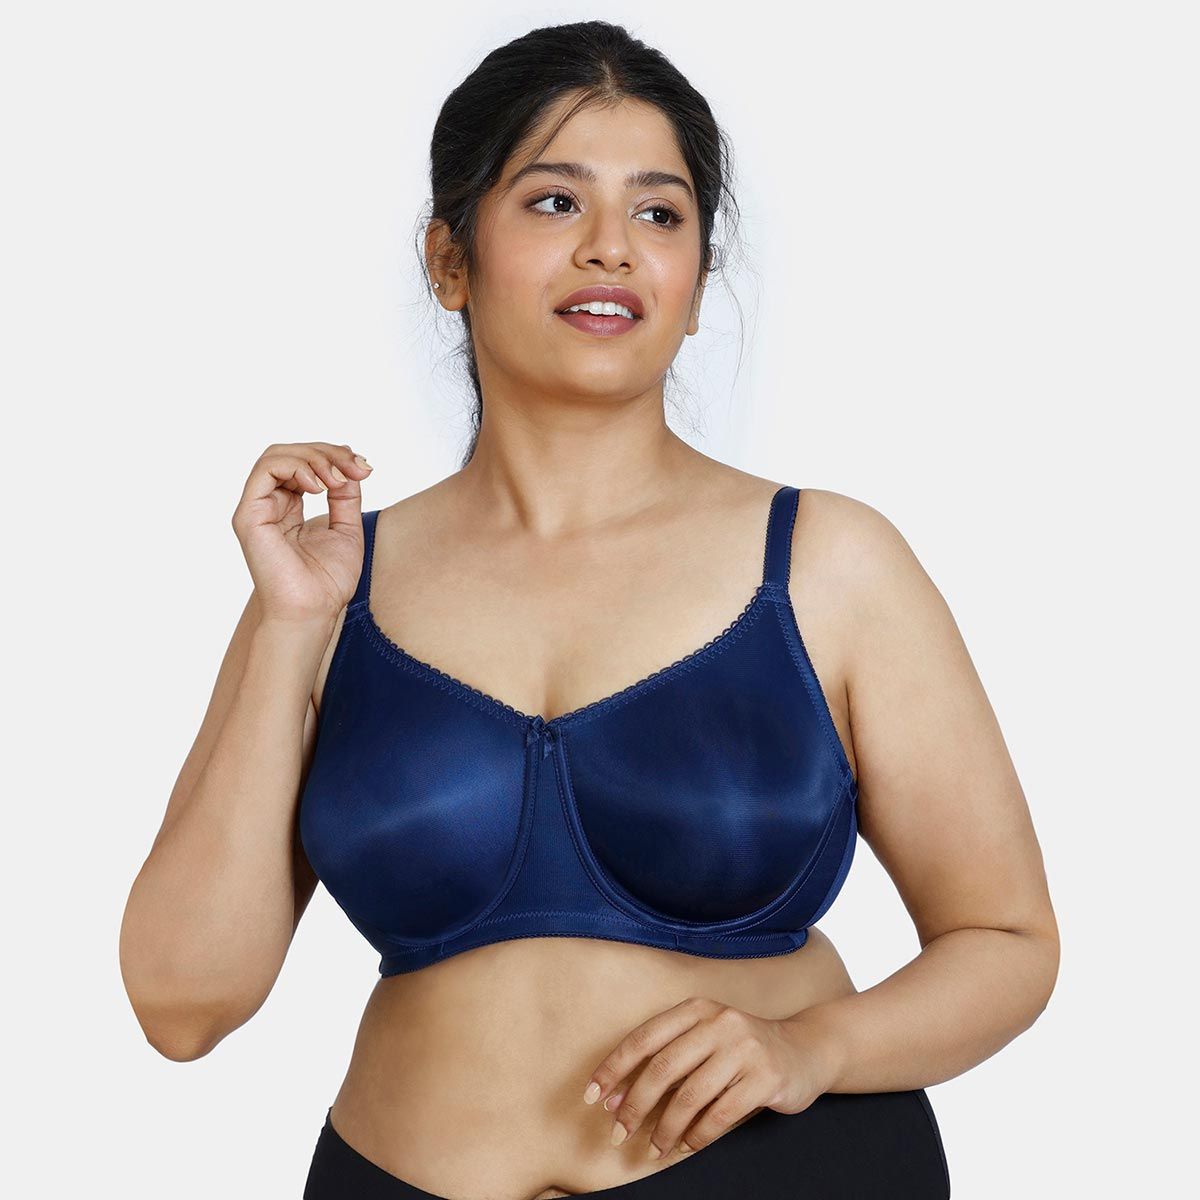 Double Layered Wirefree Bra Blue 7187498.htm - Buy Double Layered Wirefree  Bra Blue 7187498.htm online in India